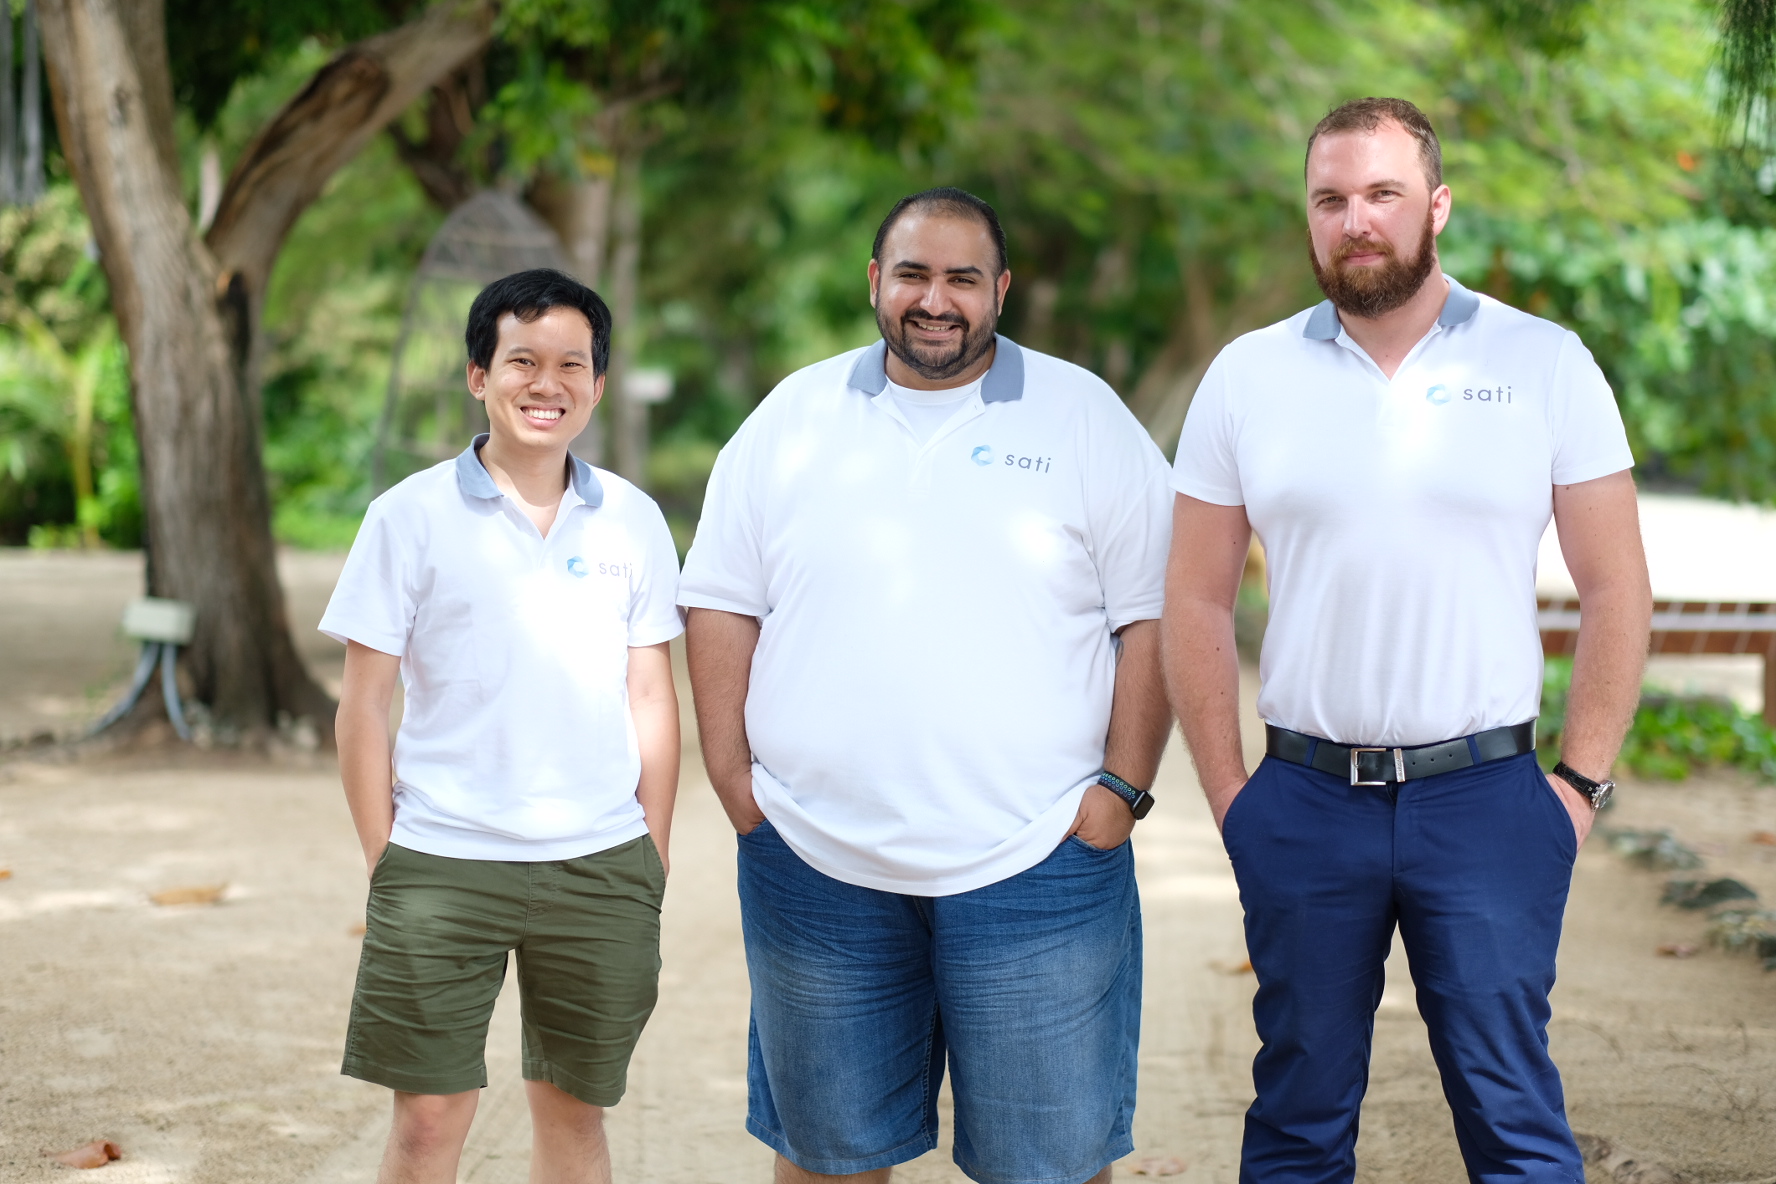 Sati provides on-demand mental health support with volunteer-run application